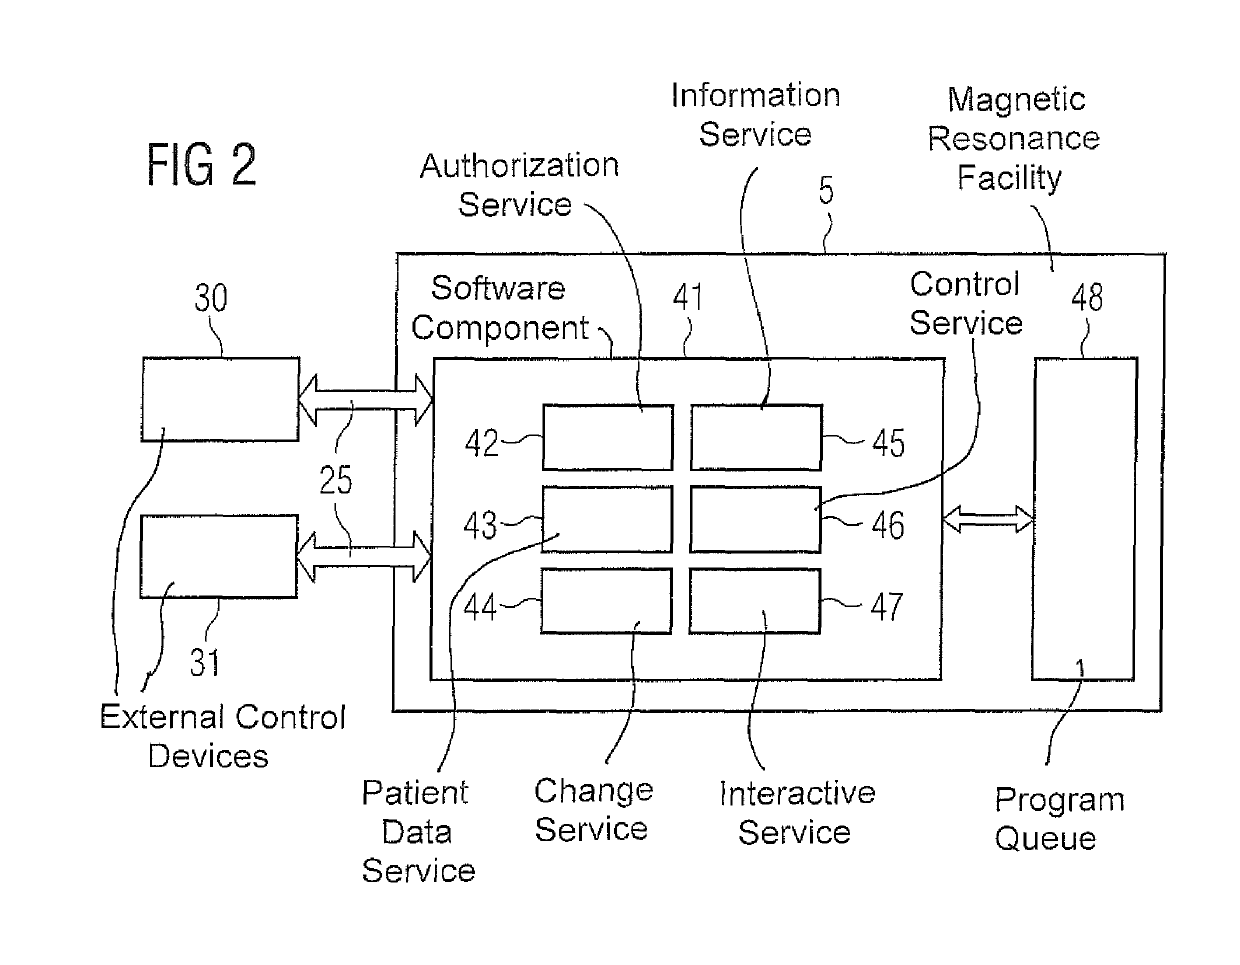 Control of a magnetic resonance facility by an external control device